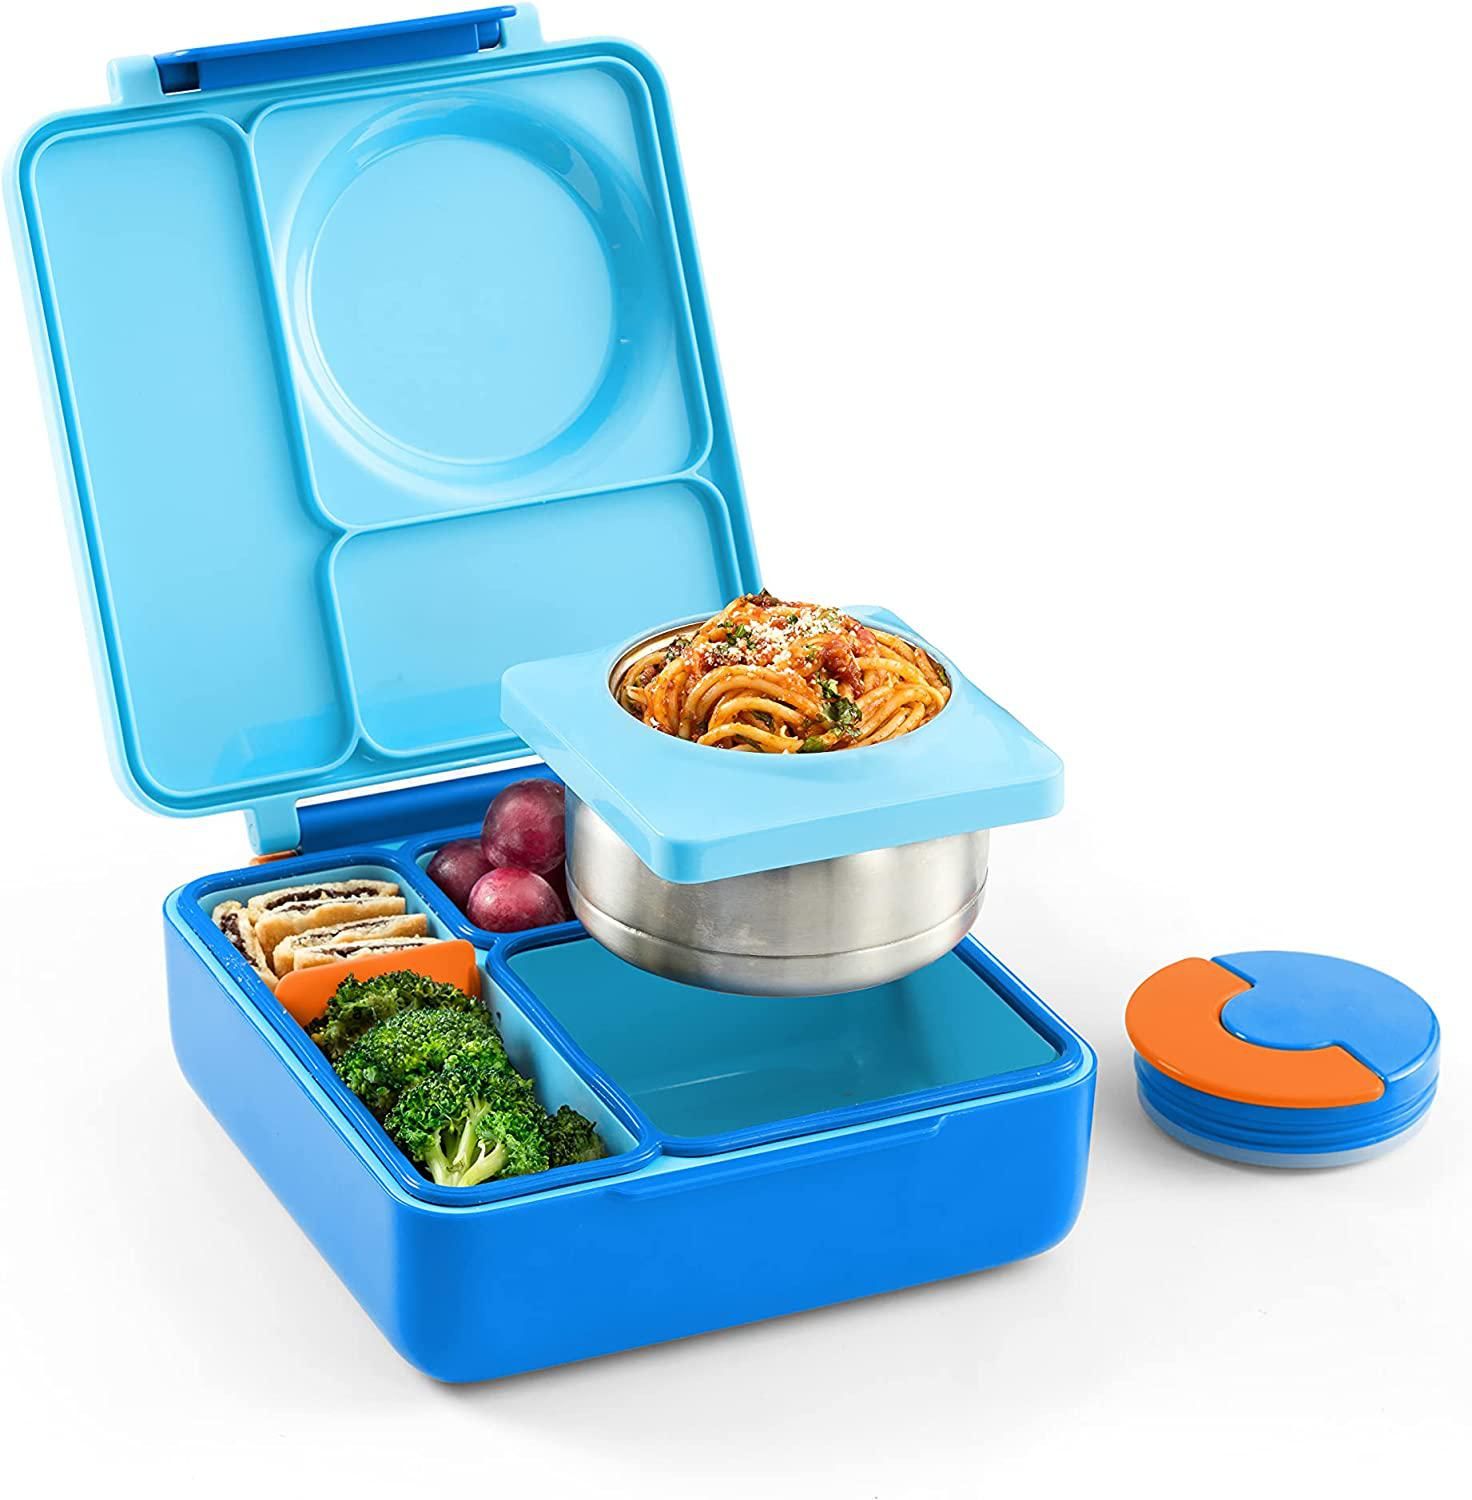  yodo 3-Way Convertible Playful Insulated Kids Lunch